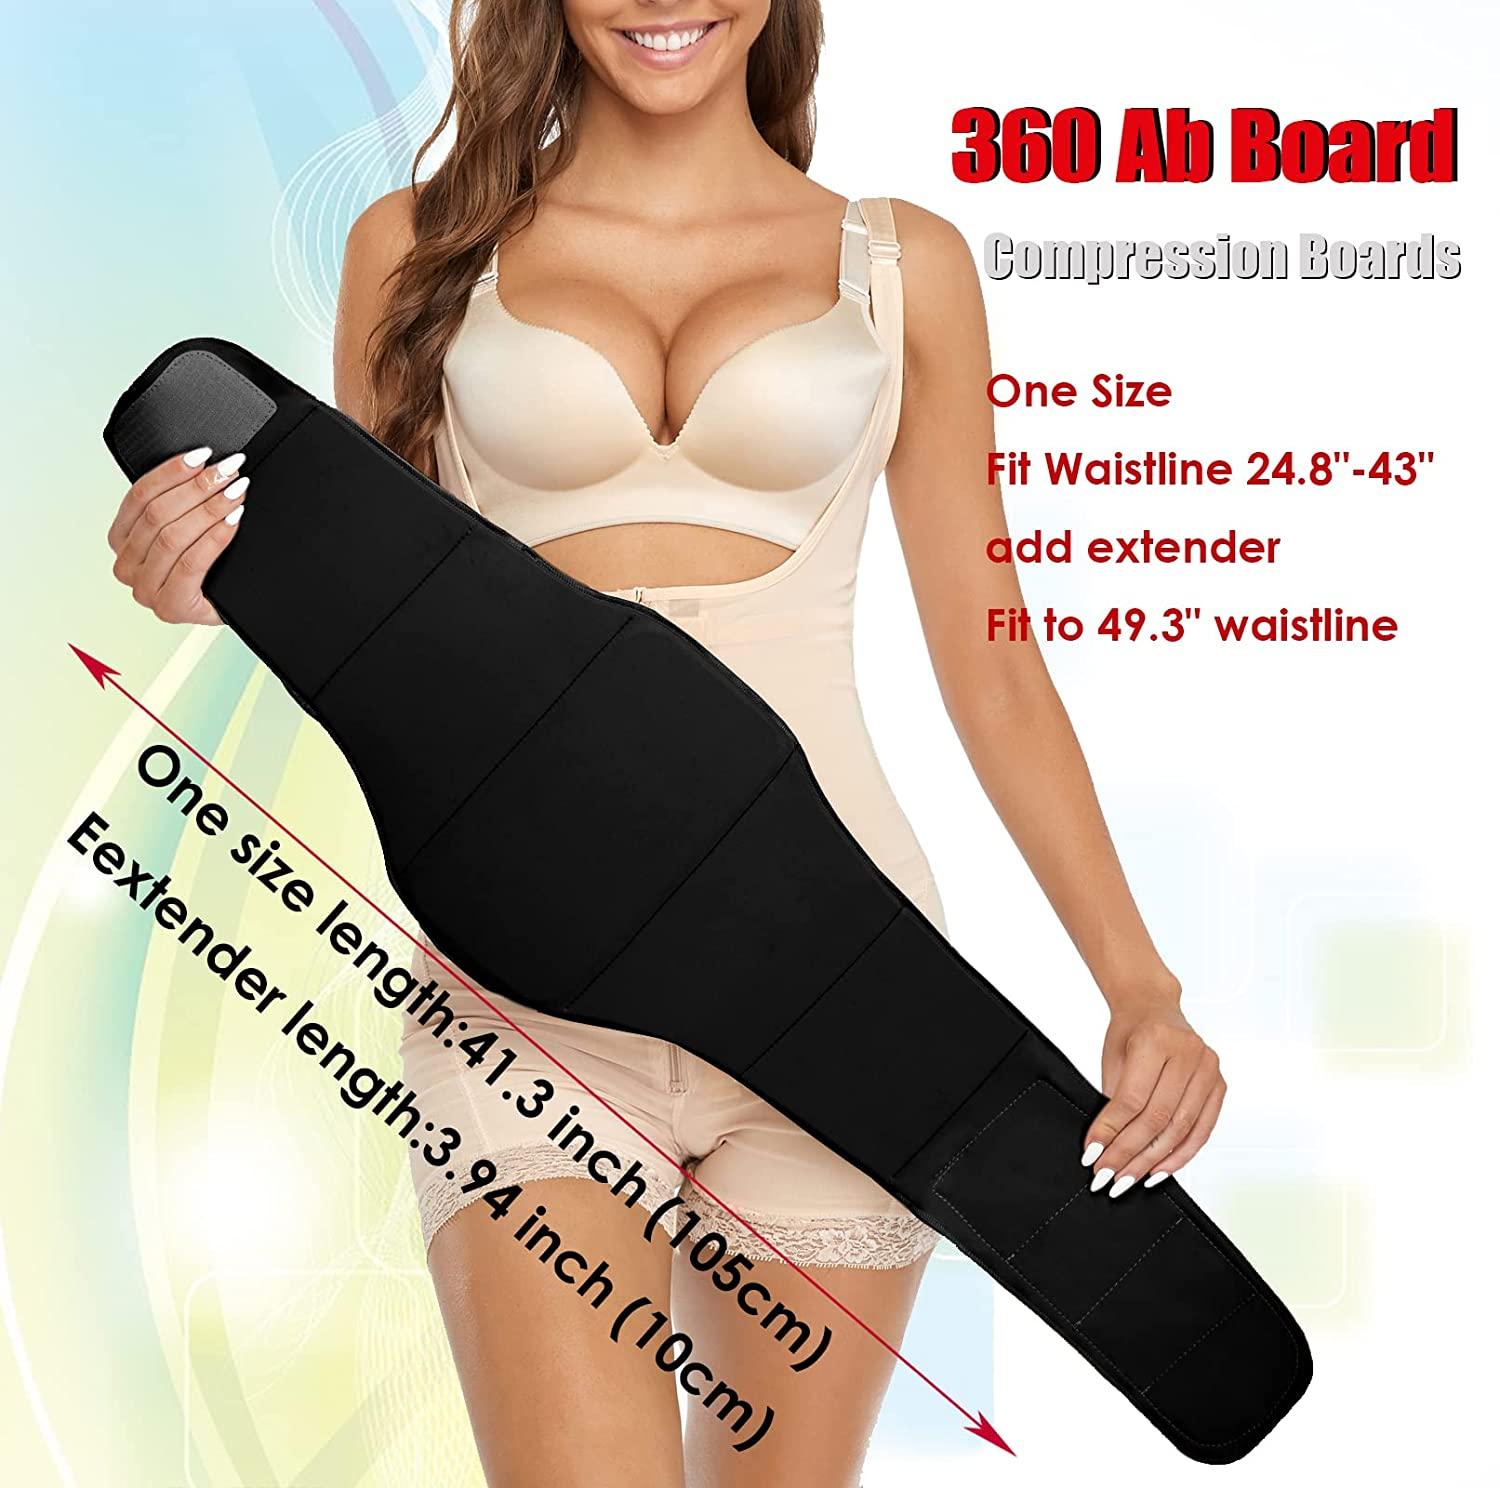 Buy Compression Flattening Ab Lipo Board Post Surgery Foam After